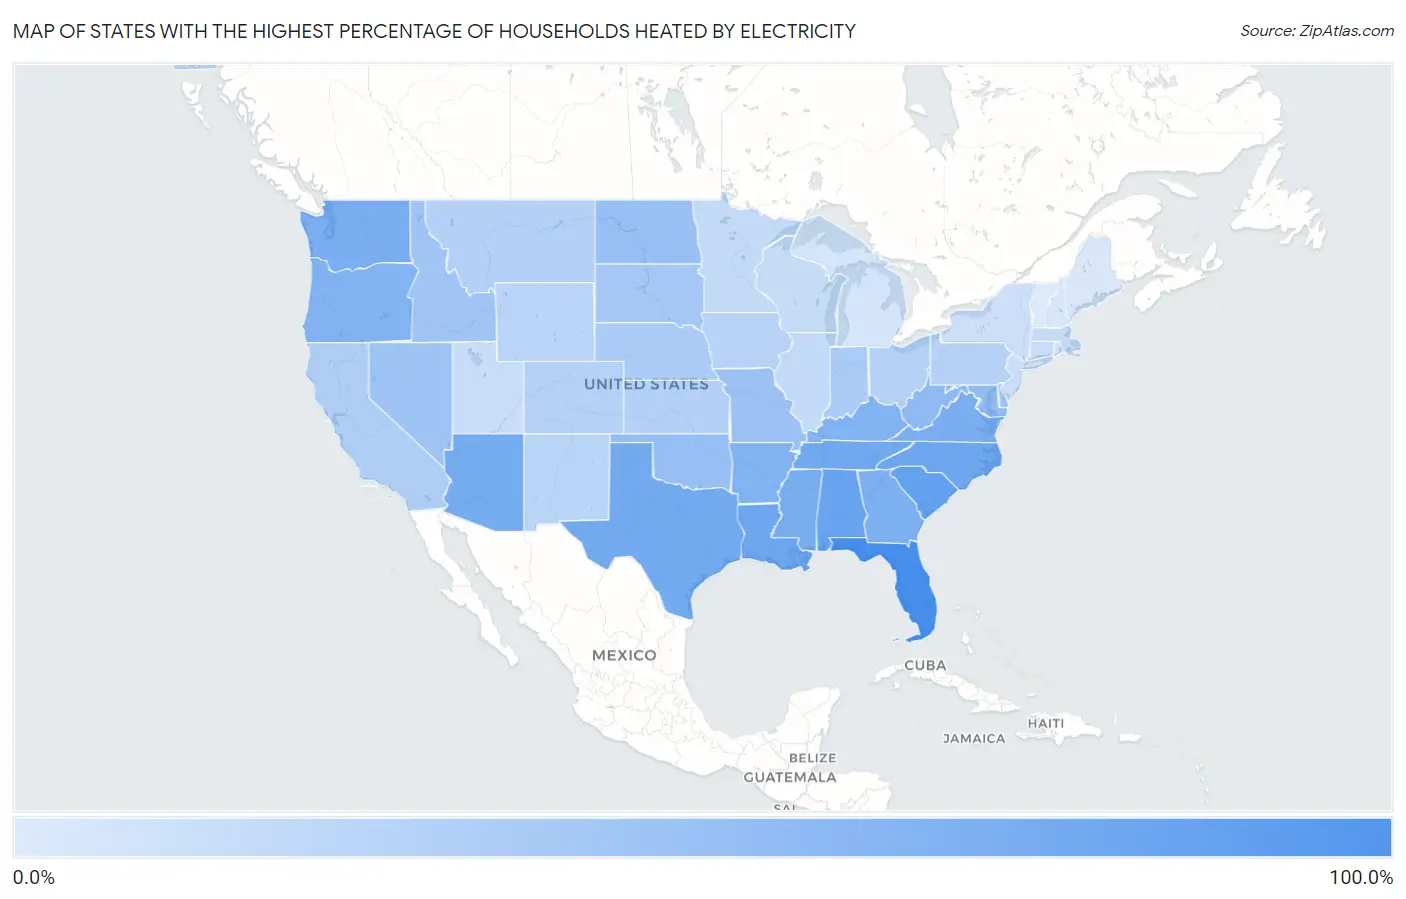 States with the Highest Percentage of Households Heated by Electricity in the United States Map